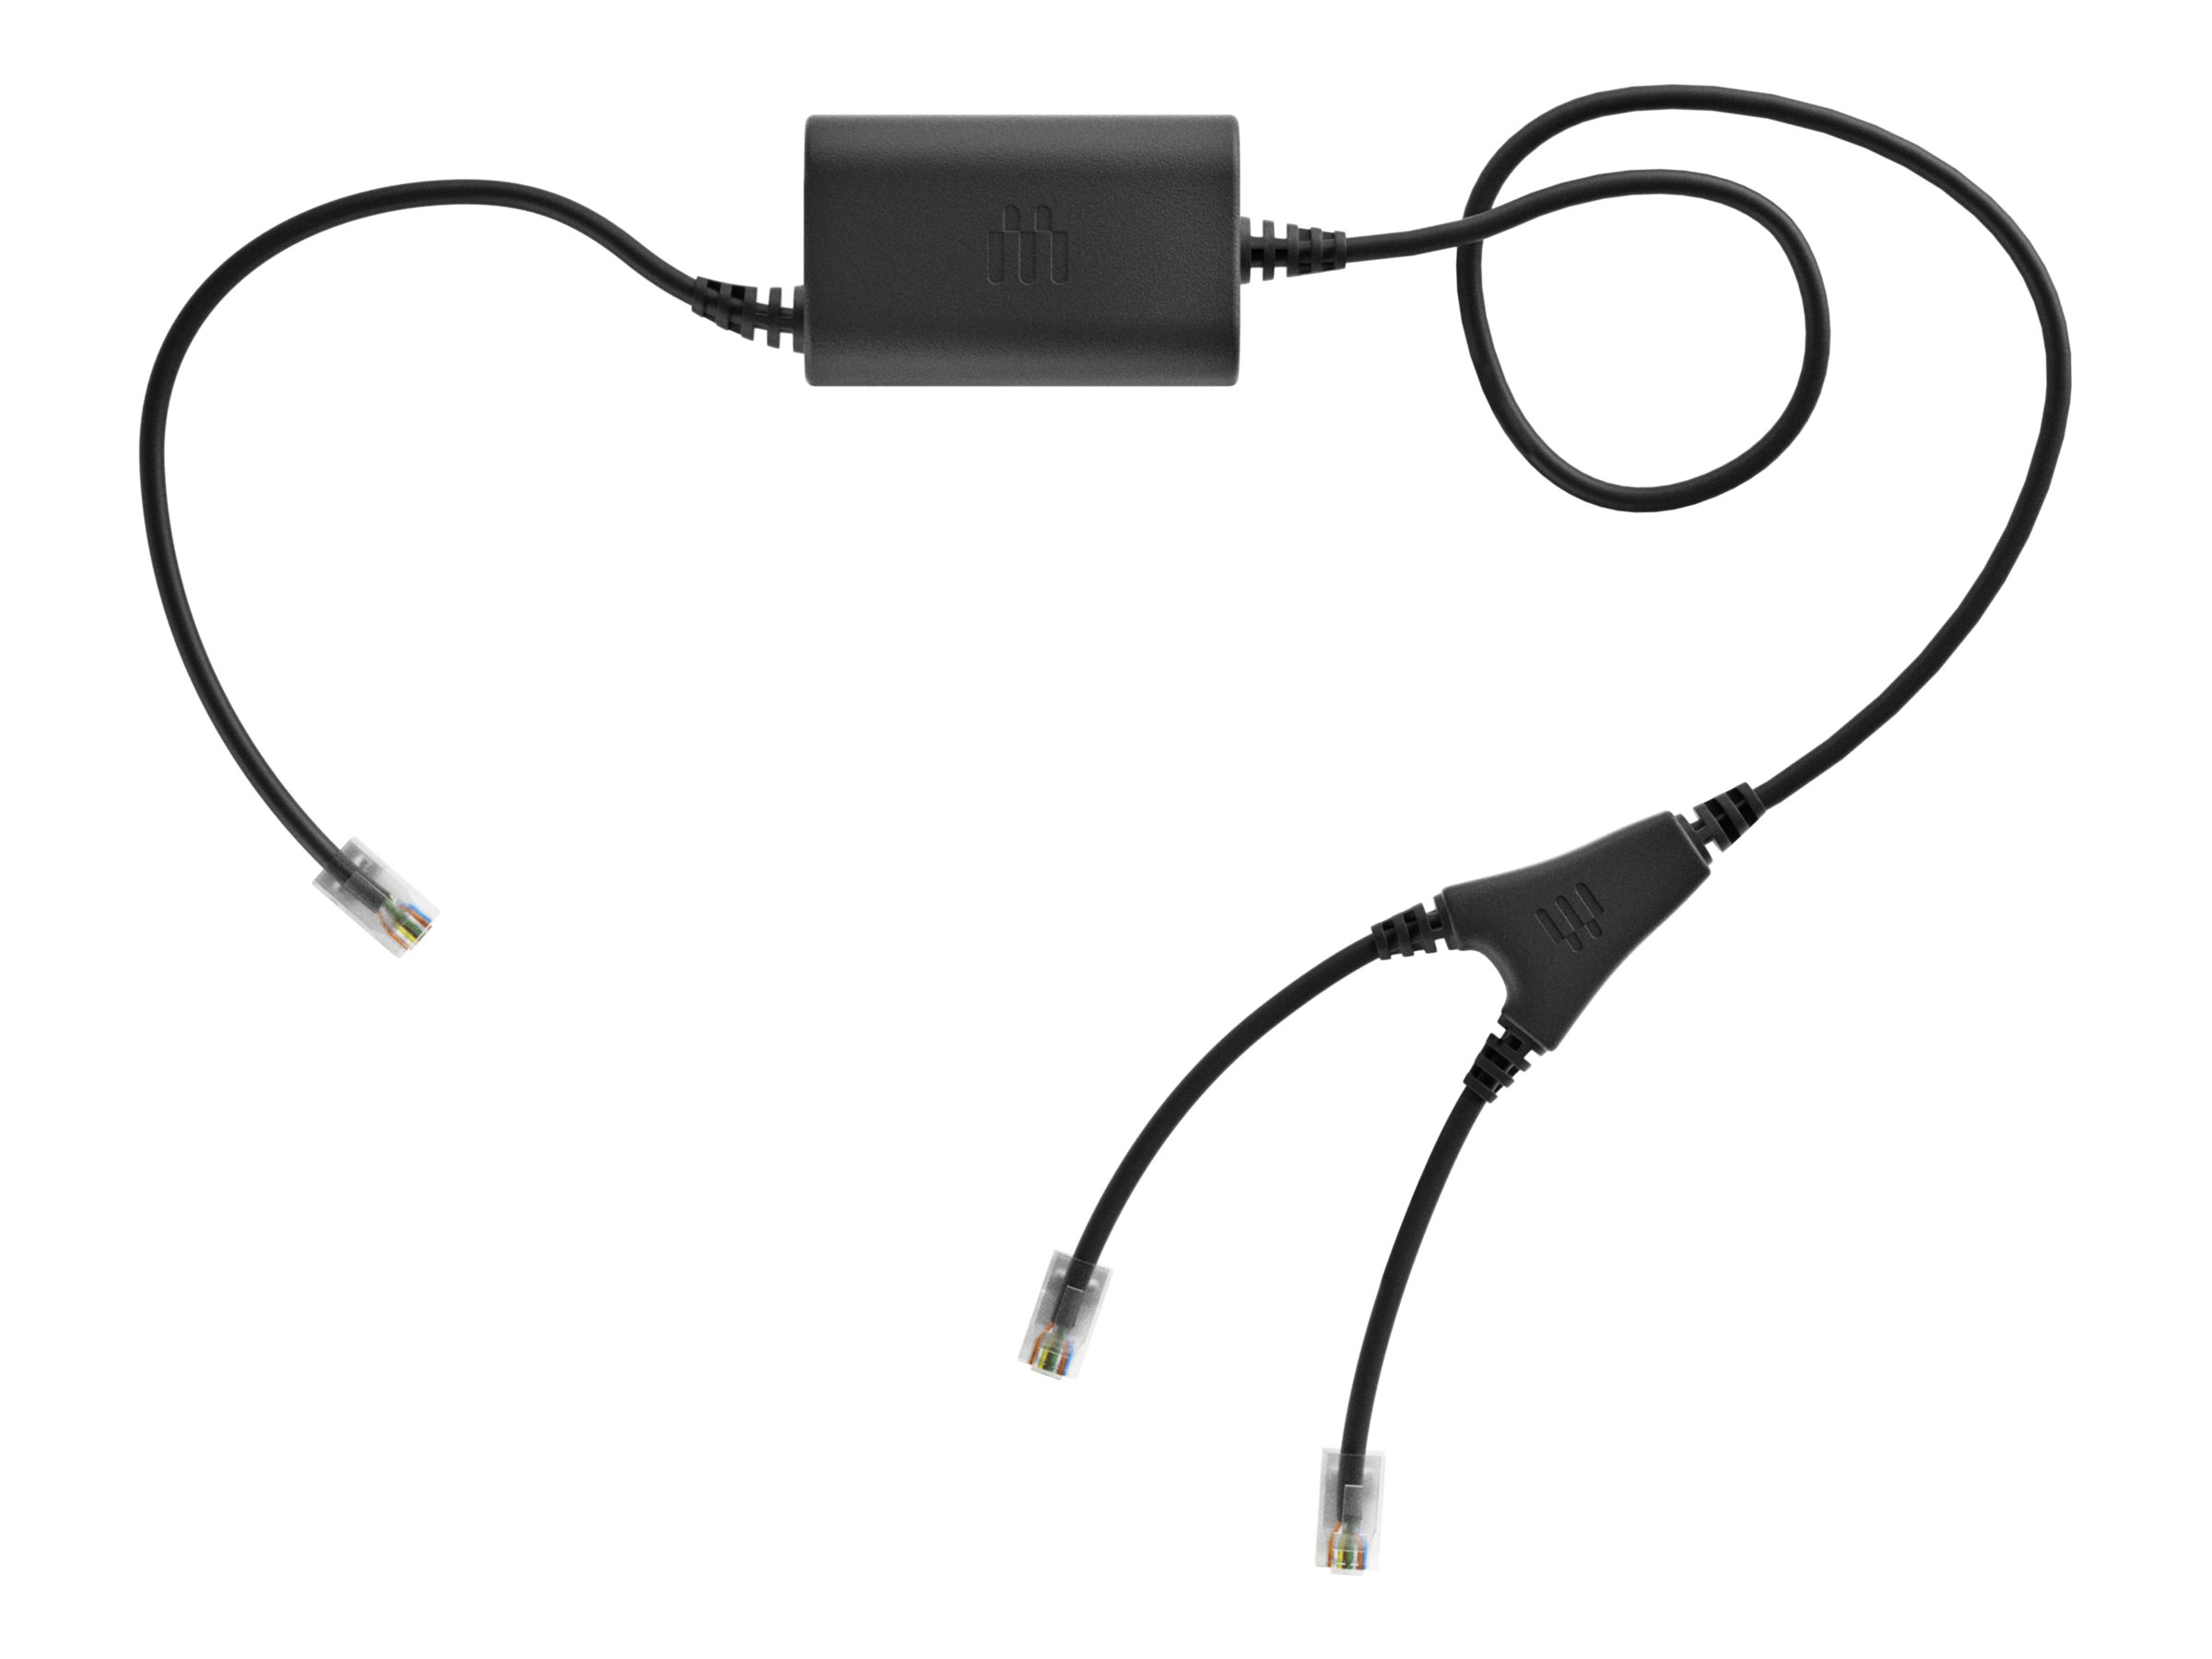 EPOS CEHS AV - Electronic hook switch adapter for headset, VoIP phone | www.publicsector.shidirect.com